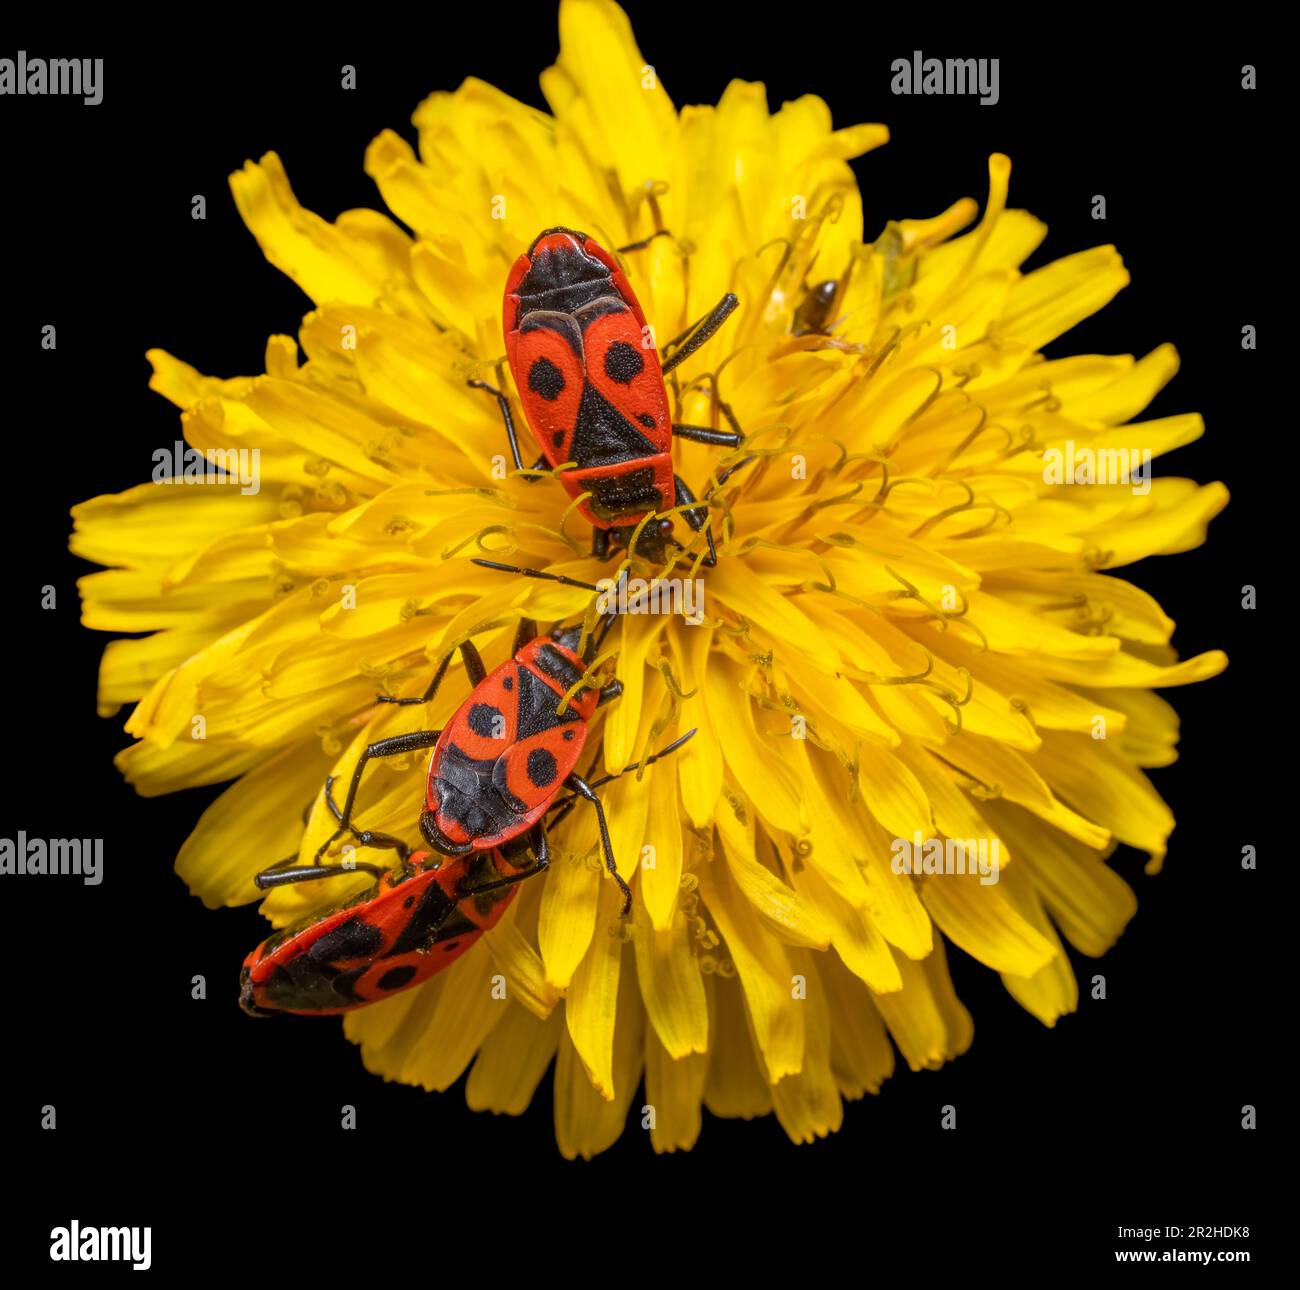 Some firebugs on a blooming yellow dandelion flower Stock Photo